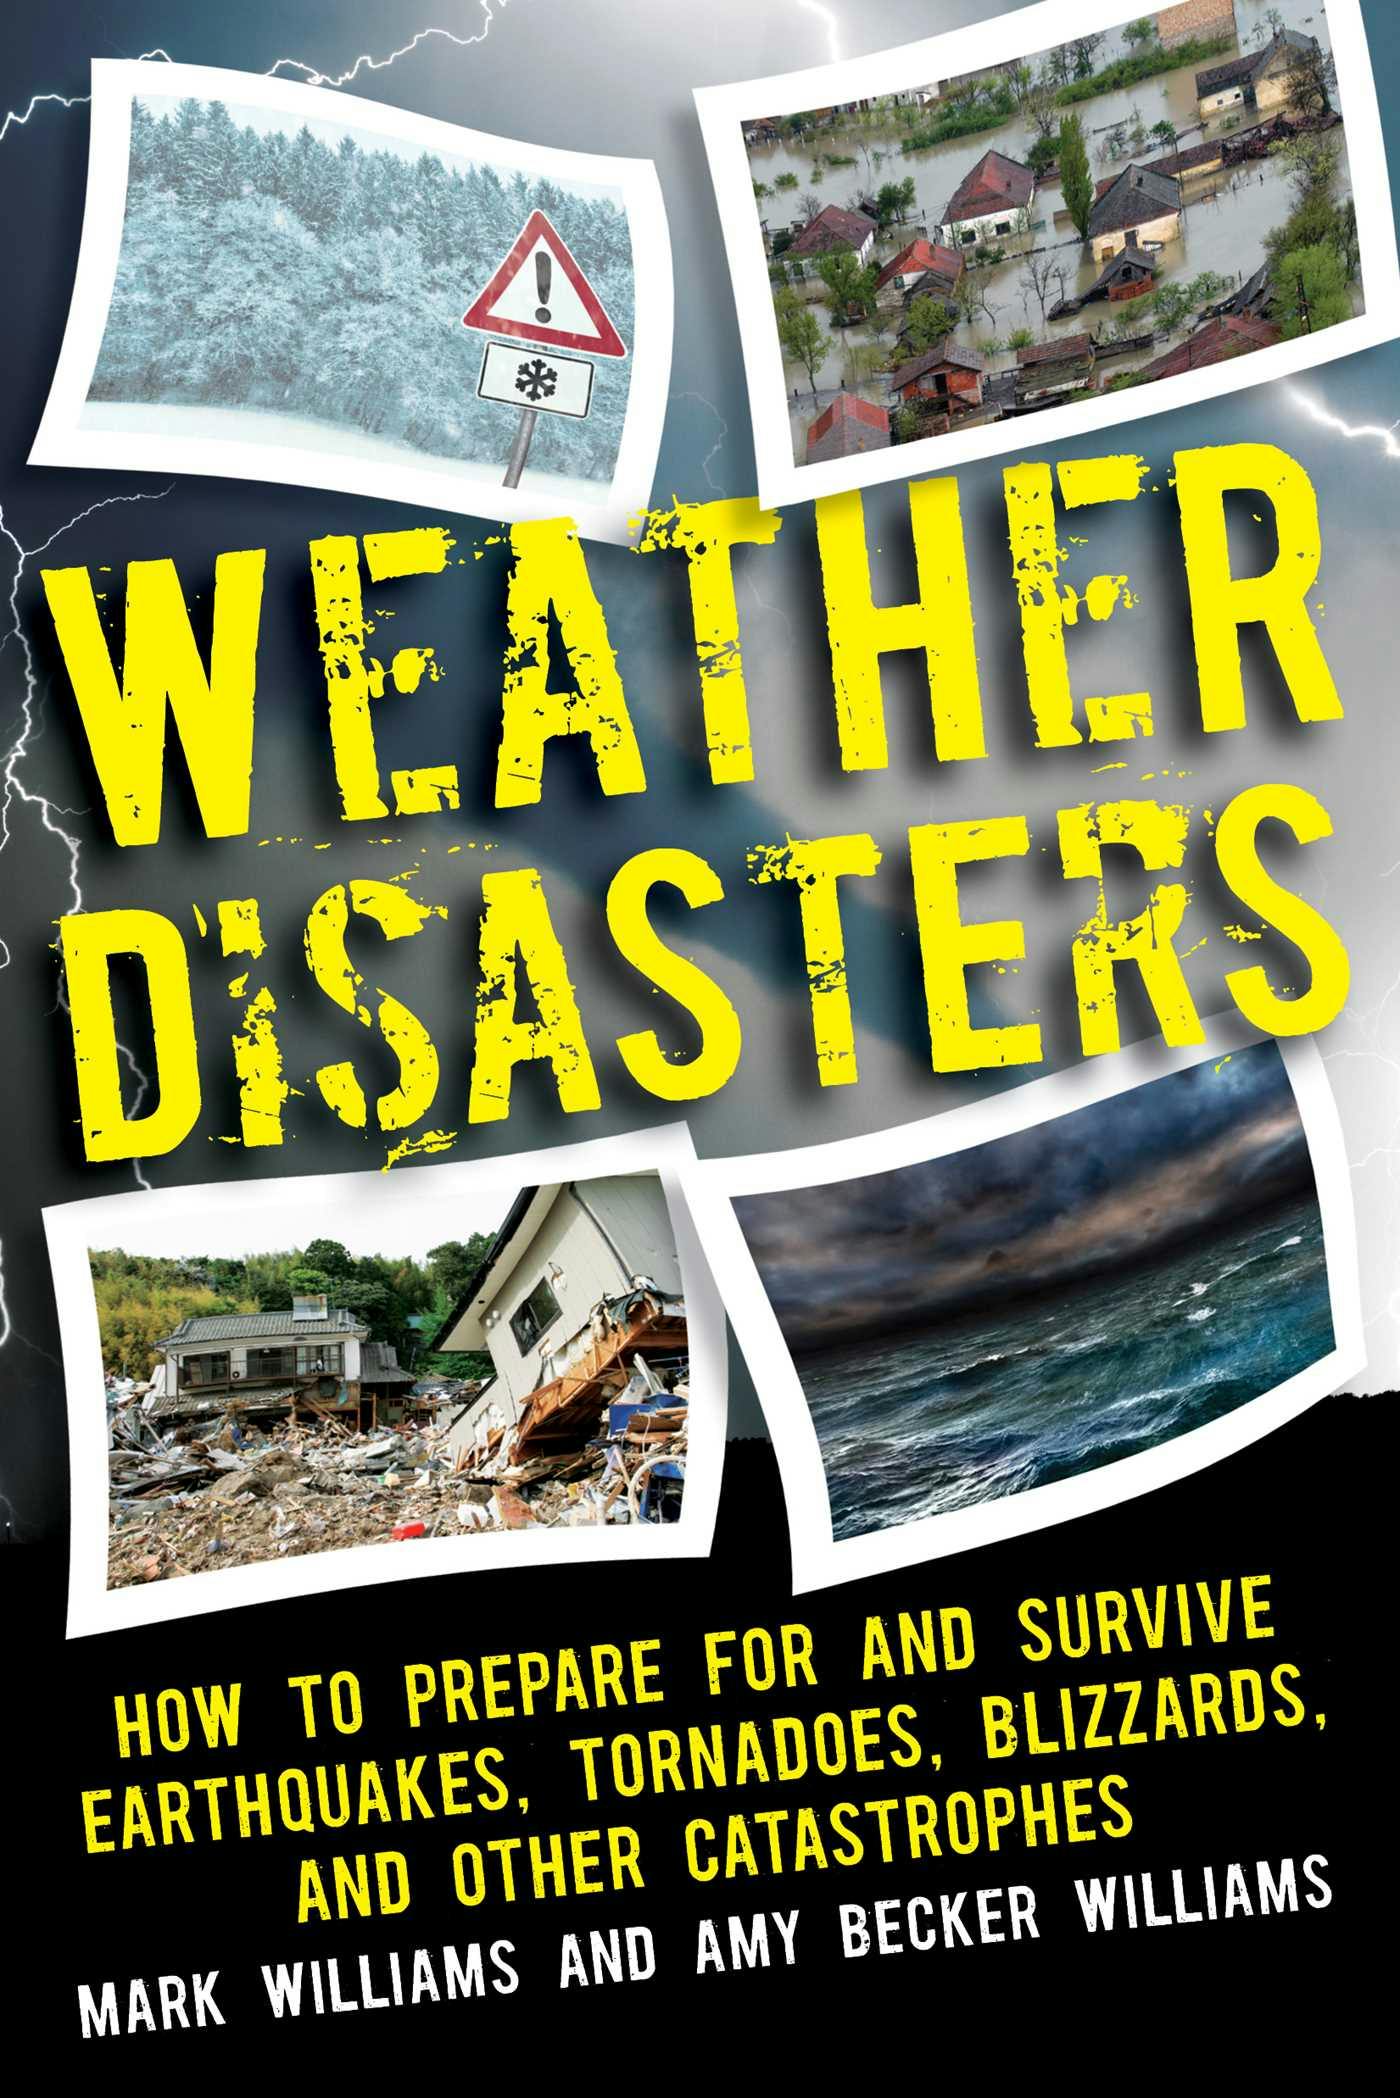 Weather Disasters: How to Prepare For and Survive Earthquakes, Tornadoes, Blizzards, and Other Catastrophes - Mark D. Williams, Amy Becker Williams